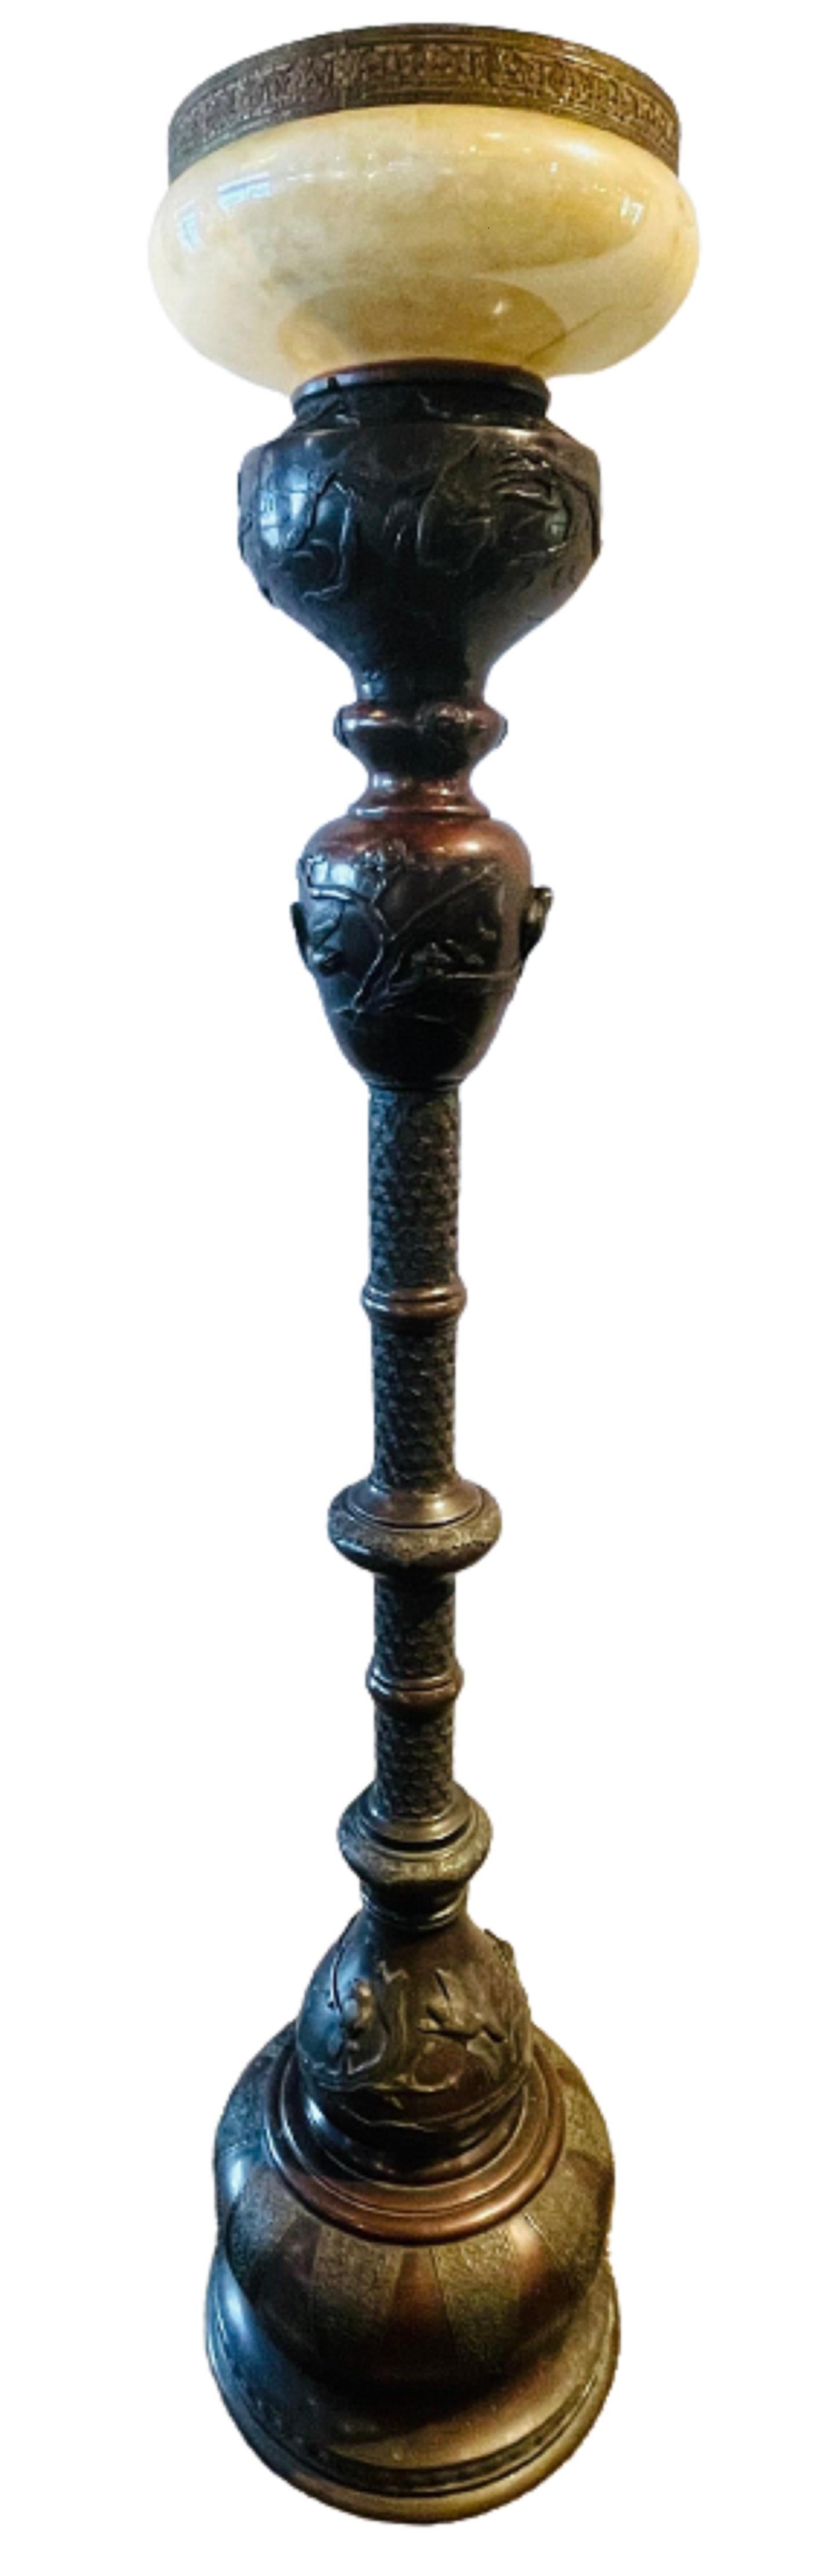 A 19th century Japanese Meiji bronze torchiere or floor lamp with foliage and bird relief.  Original globe missing - item priced accordingly.

